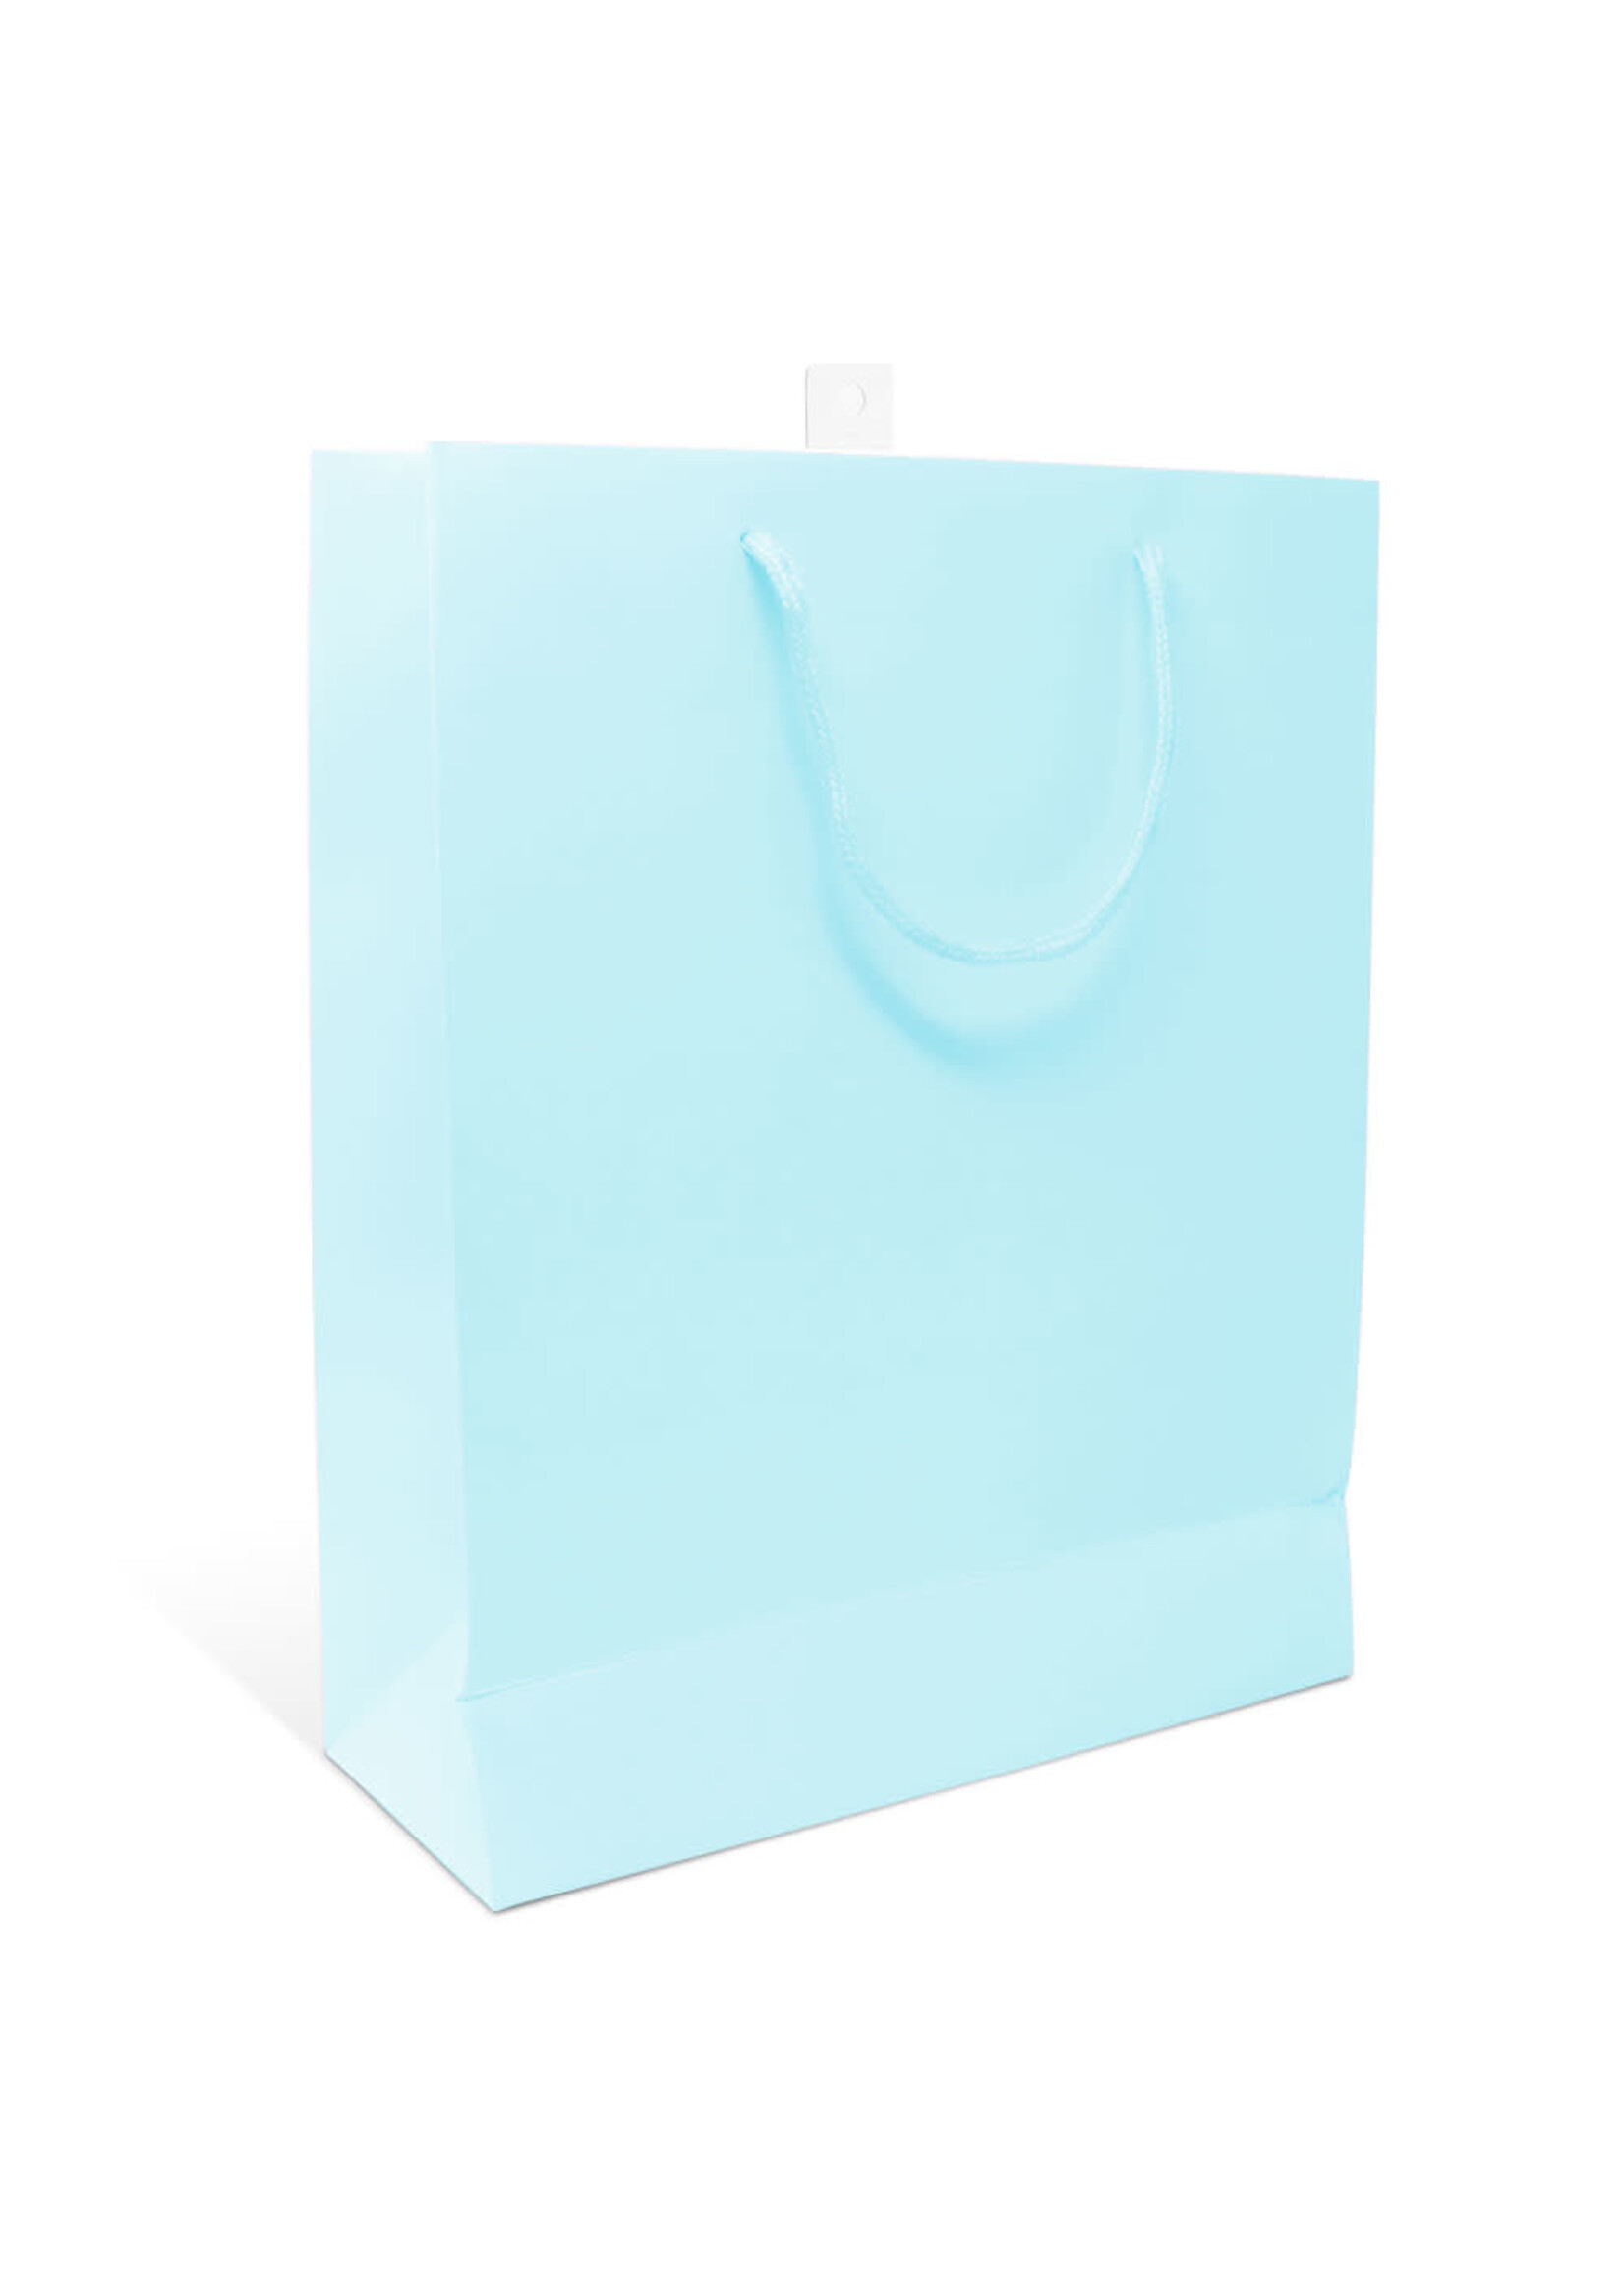 SOLID BABY BLUE GIFT BAGS MEDIUM 10.25" X 12.5" X 4"